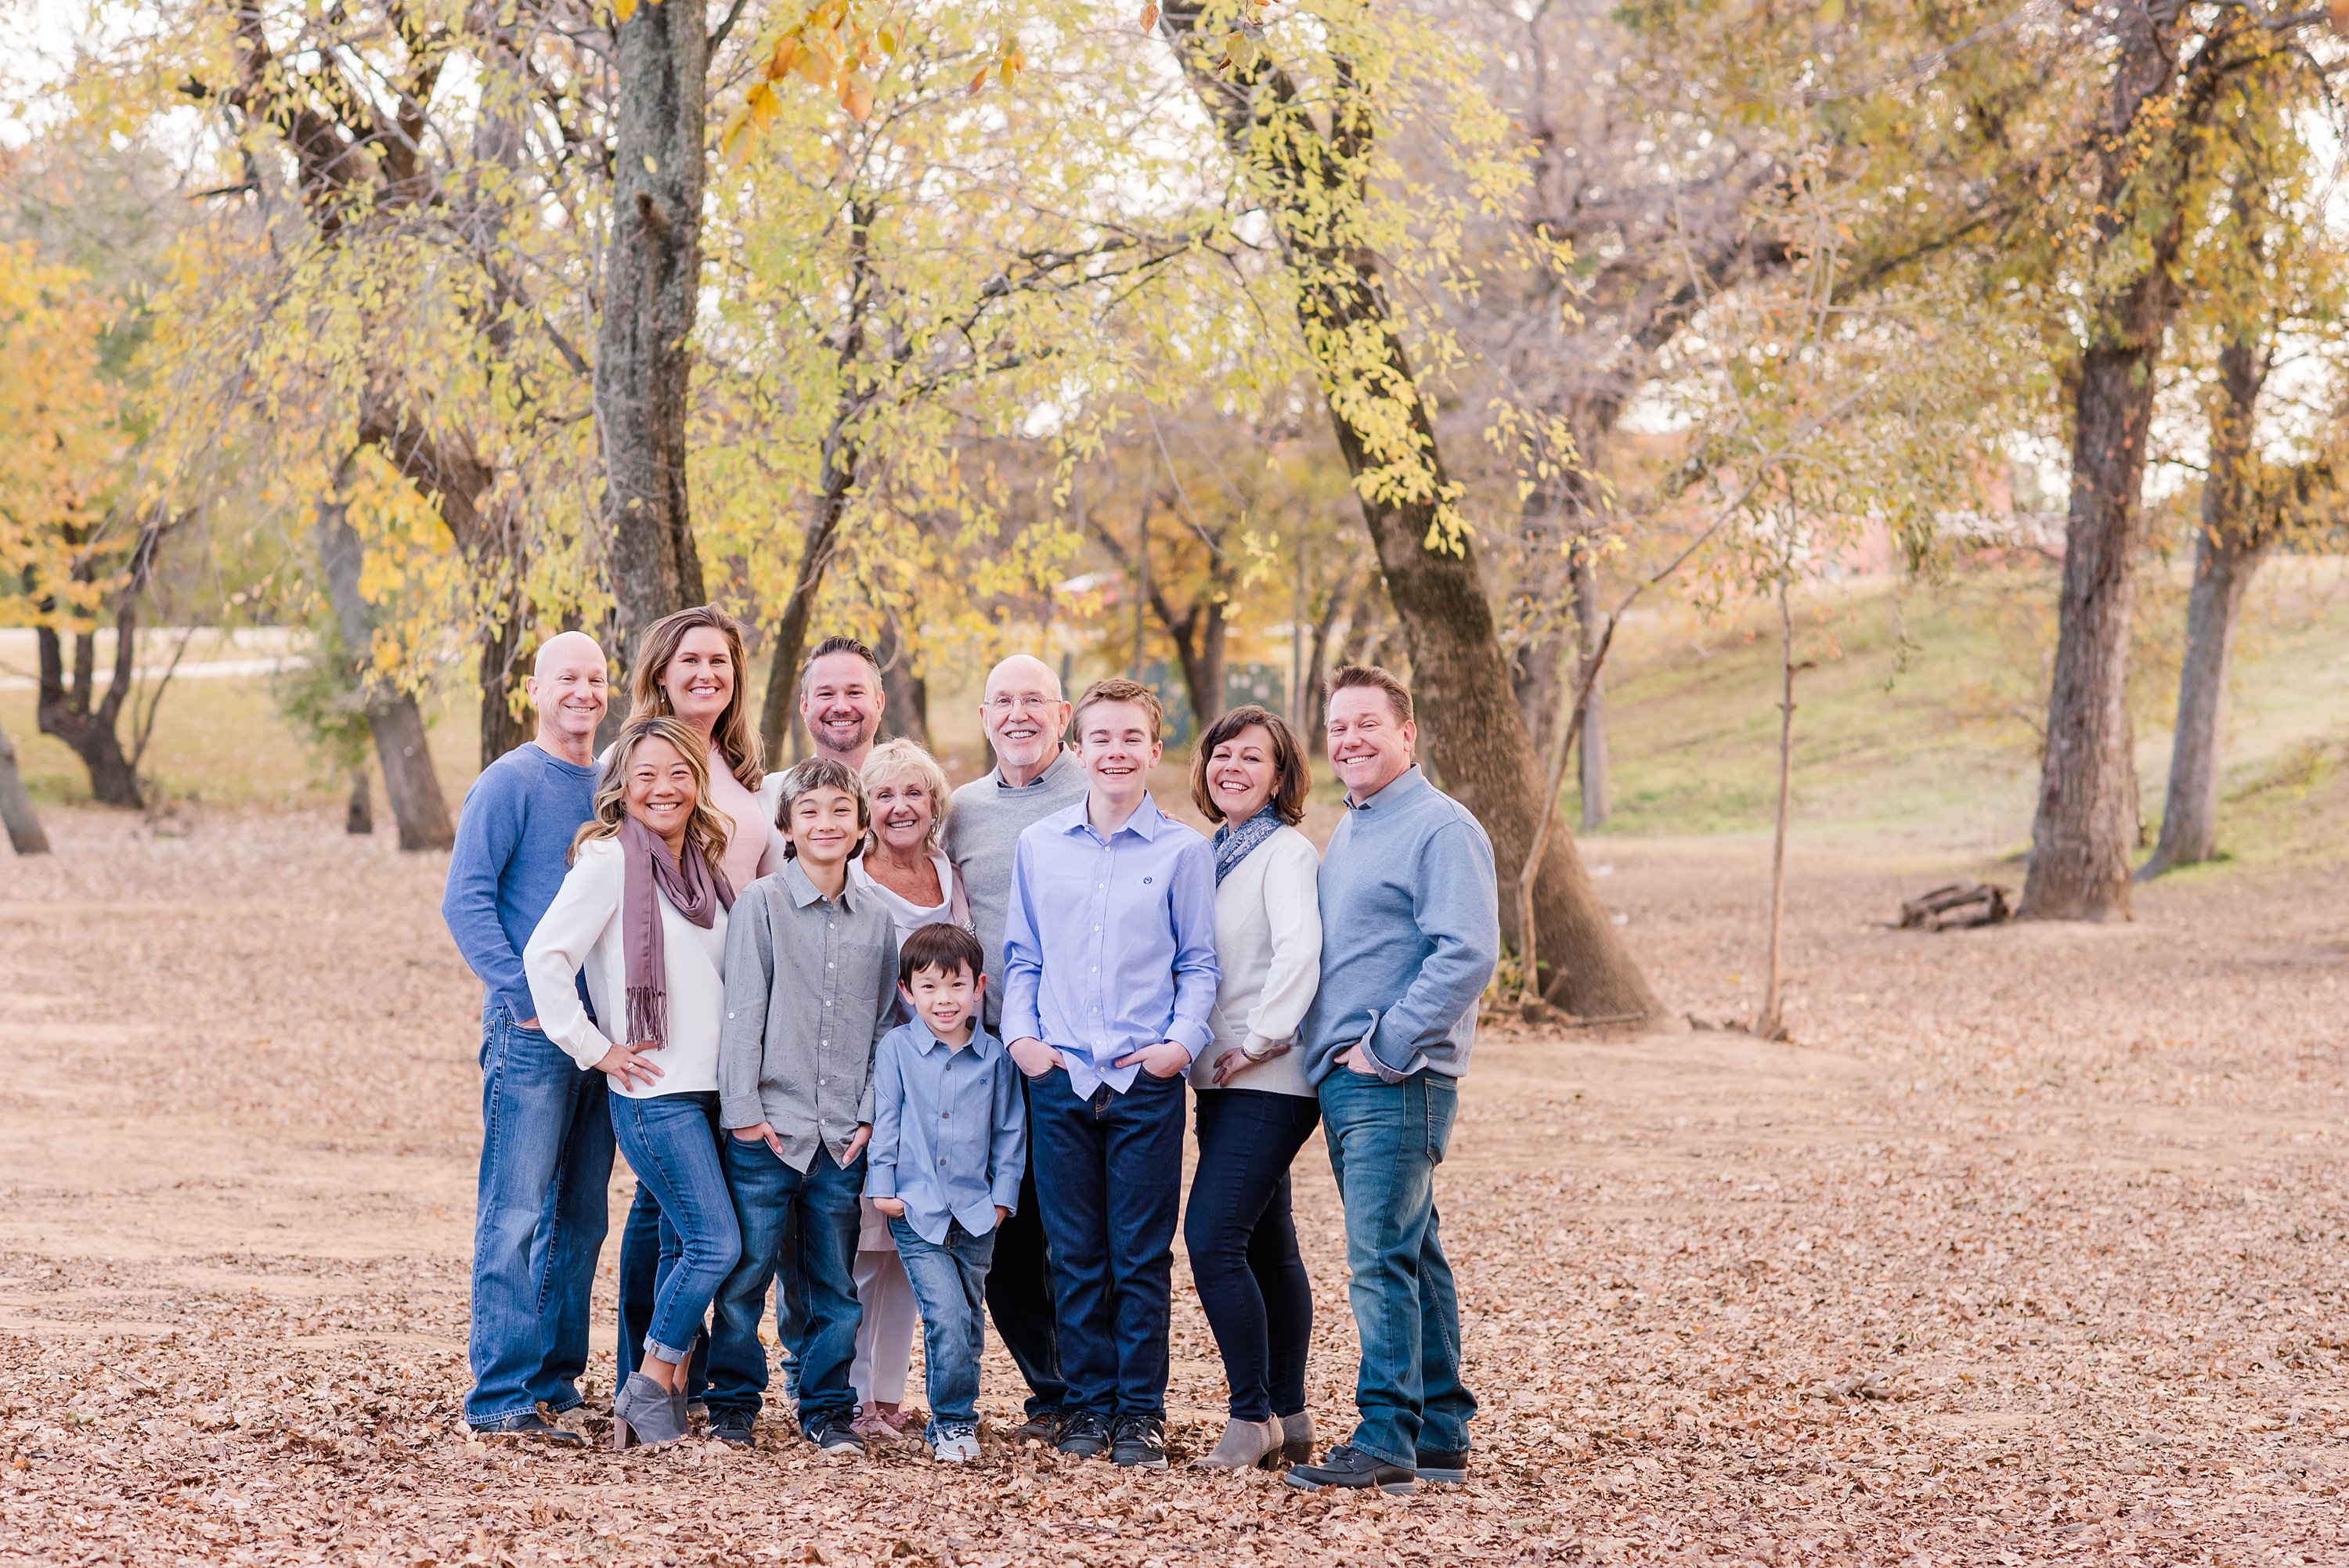 Family Portraits at Rustic Timbers Park, Flower Mound Portrait Photographer,Dallas Wedding Photographer, MaggShots Photography